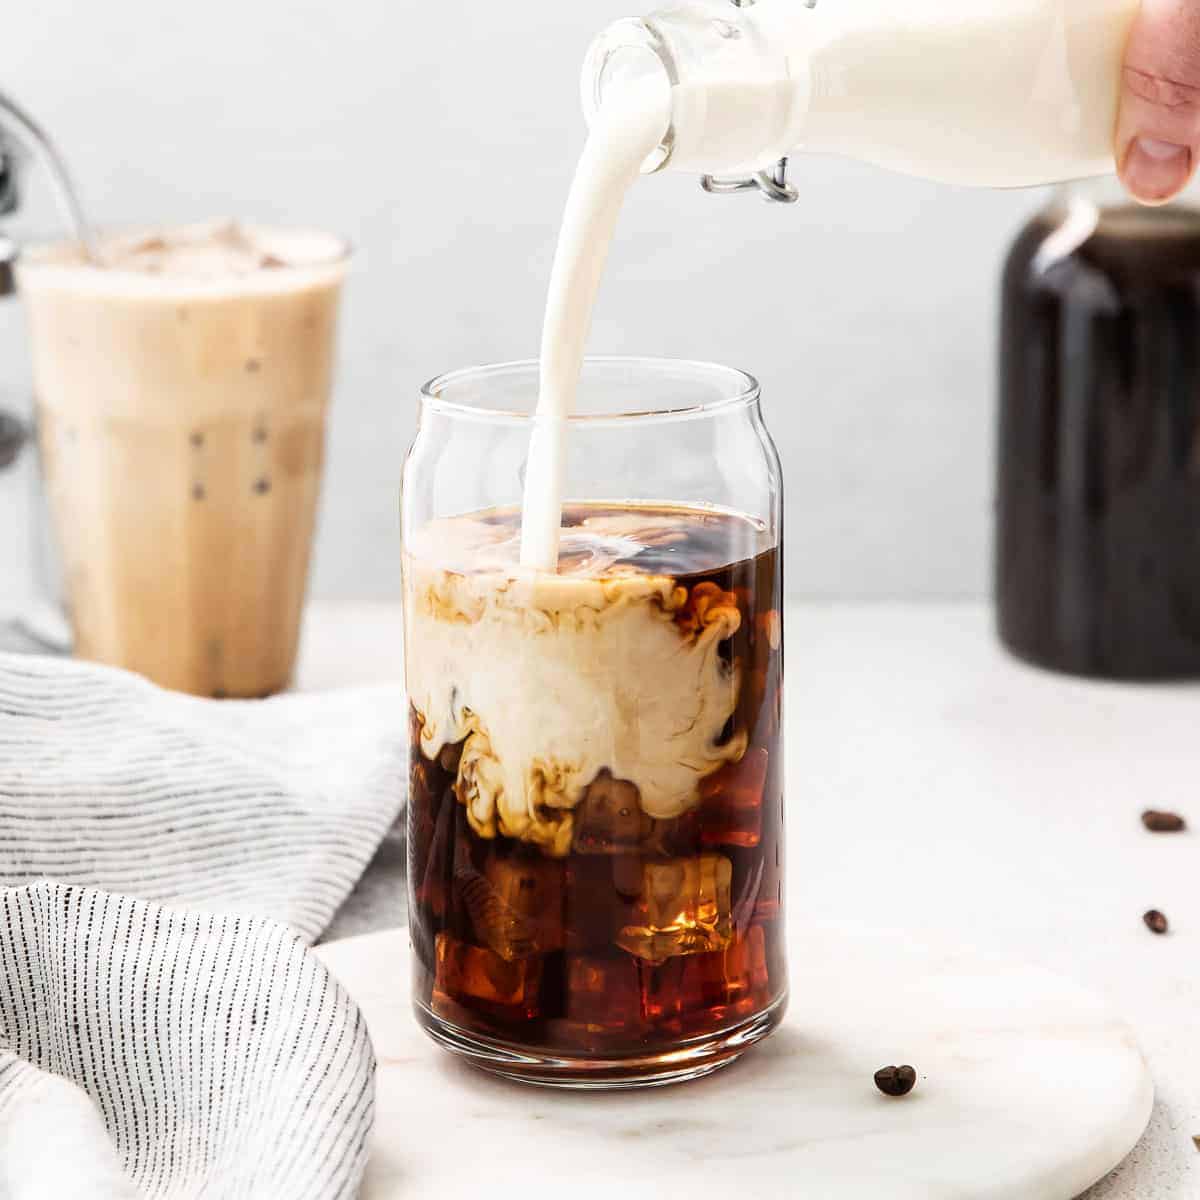 https://fitfoodiefinds.com/wp-content/uploads/2021/05/Sweet-Cream-Cold-Brew-16sq.jpg